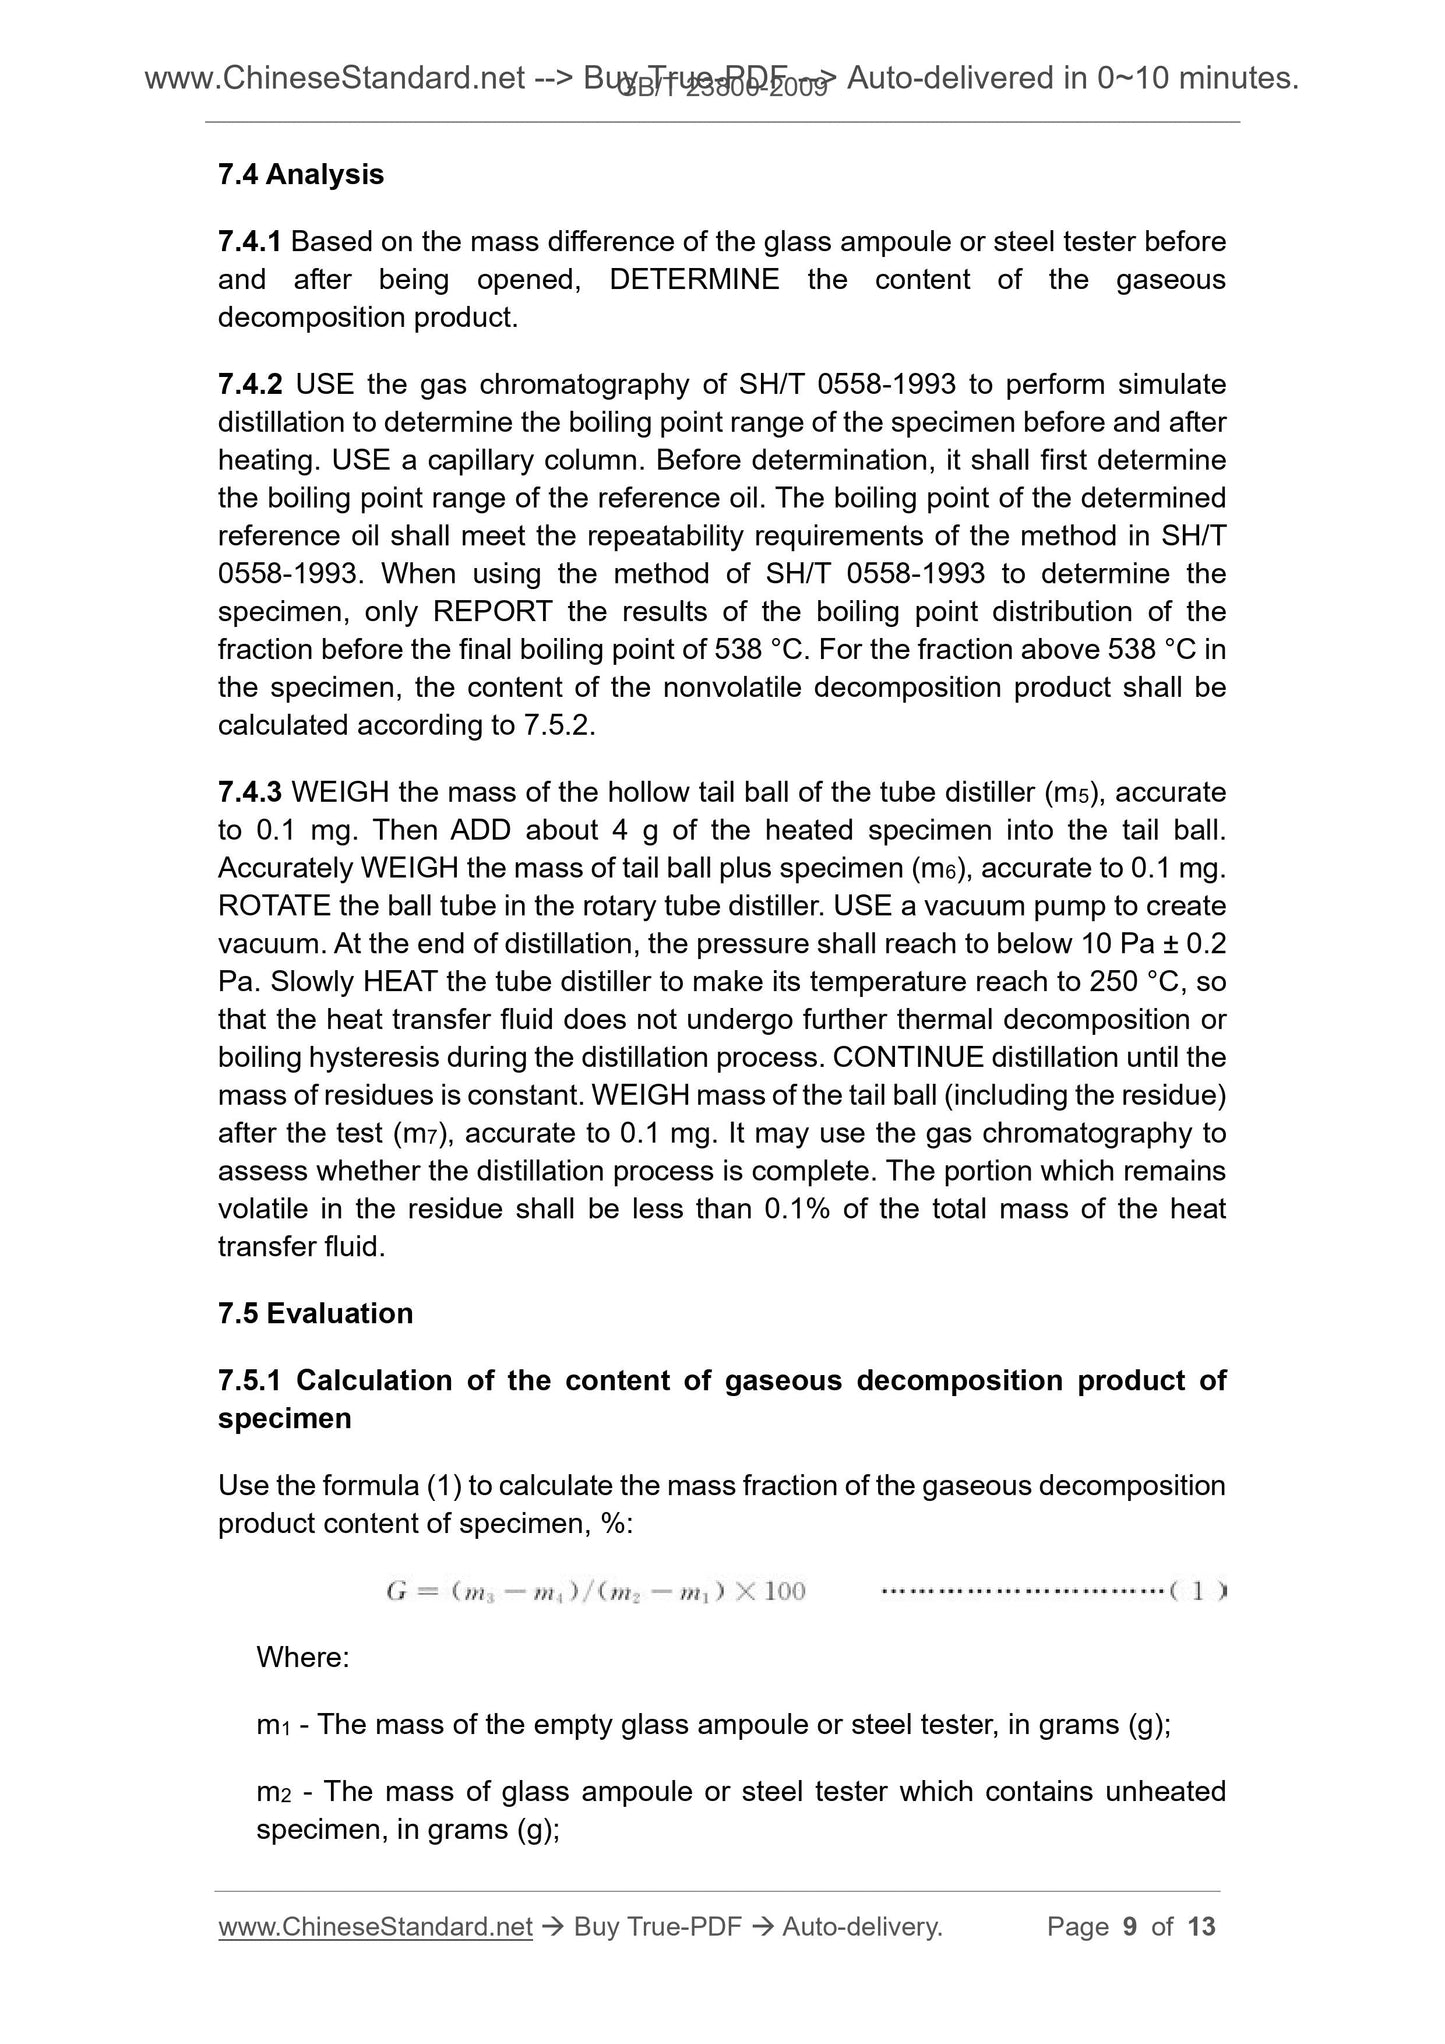 GB/T 23800-2009 Page 6